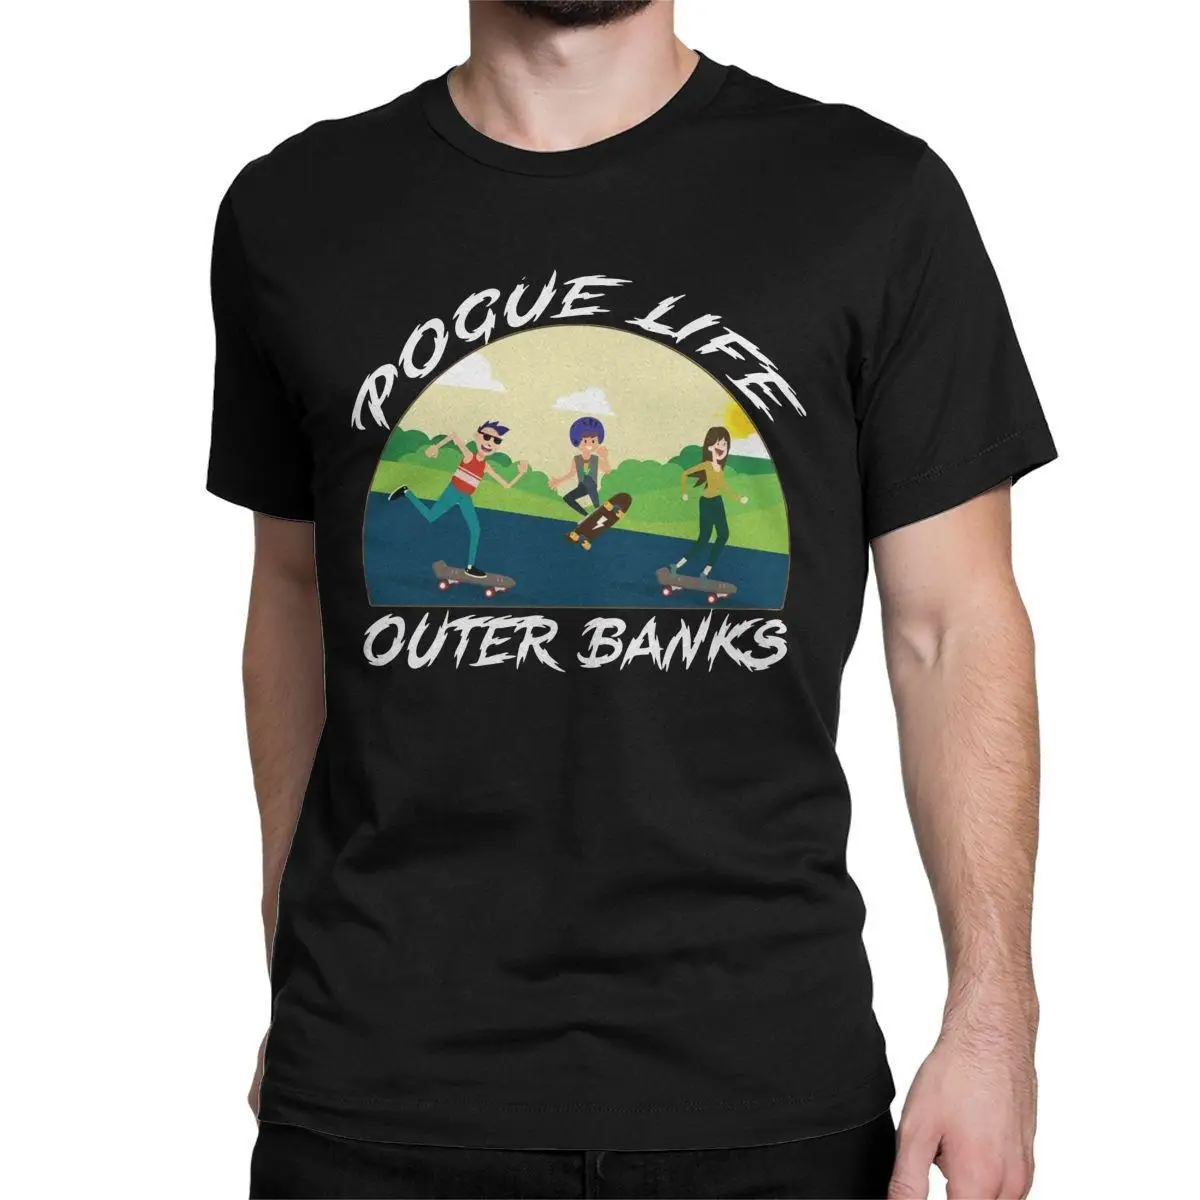 Outer Banks Pogue Life T-Shirt for Men TV Show Humorous Pure Cotton Tee Shirt Round Collar Short Sleeve T Shirts 6XL Clothes